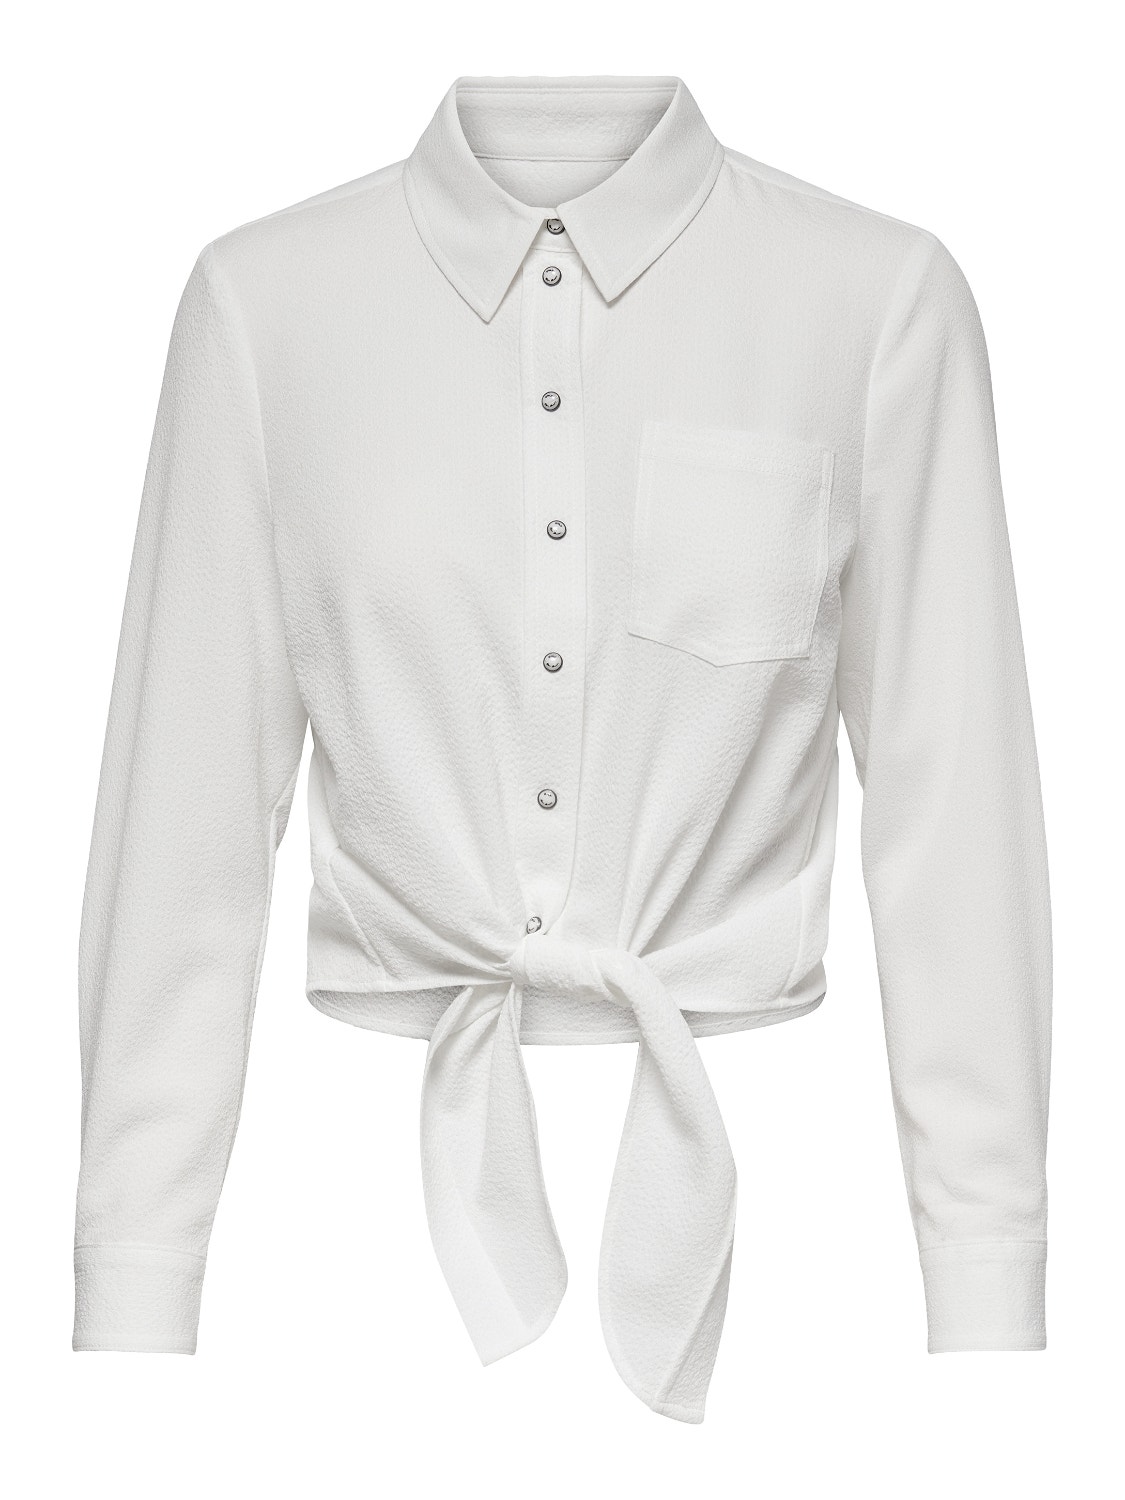 | Tie Shirt ONLY® | detail White